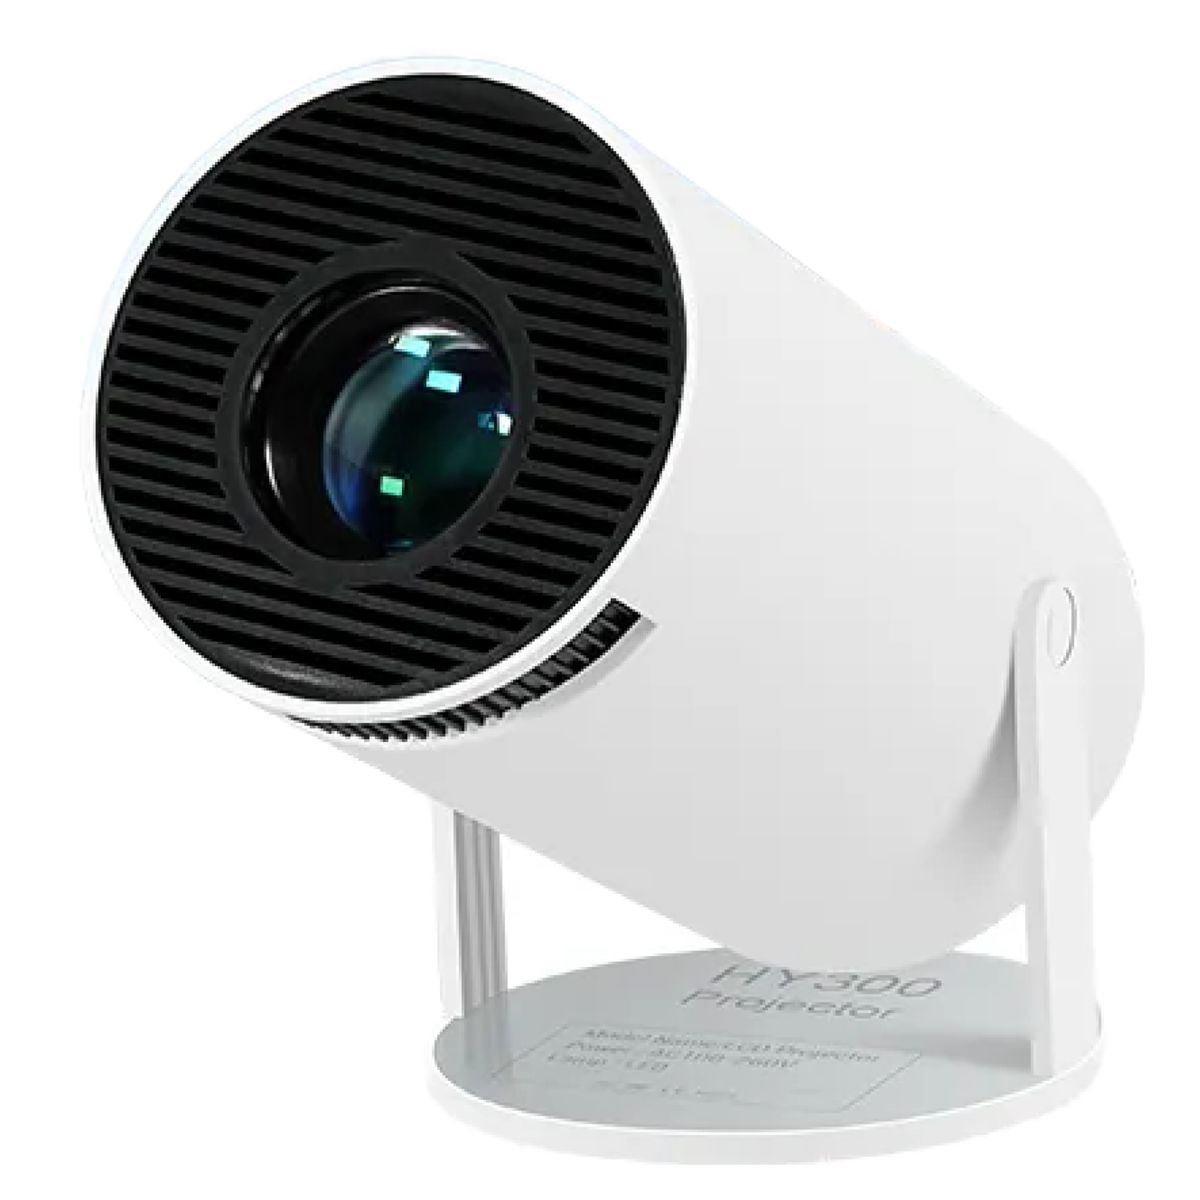 Trending Portable Projector - Small and compact - Take it everywhere